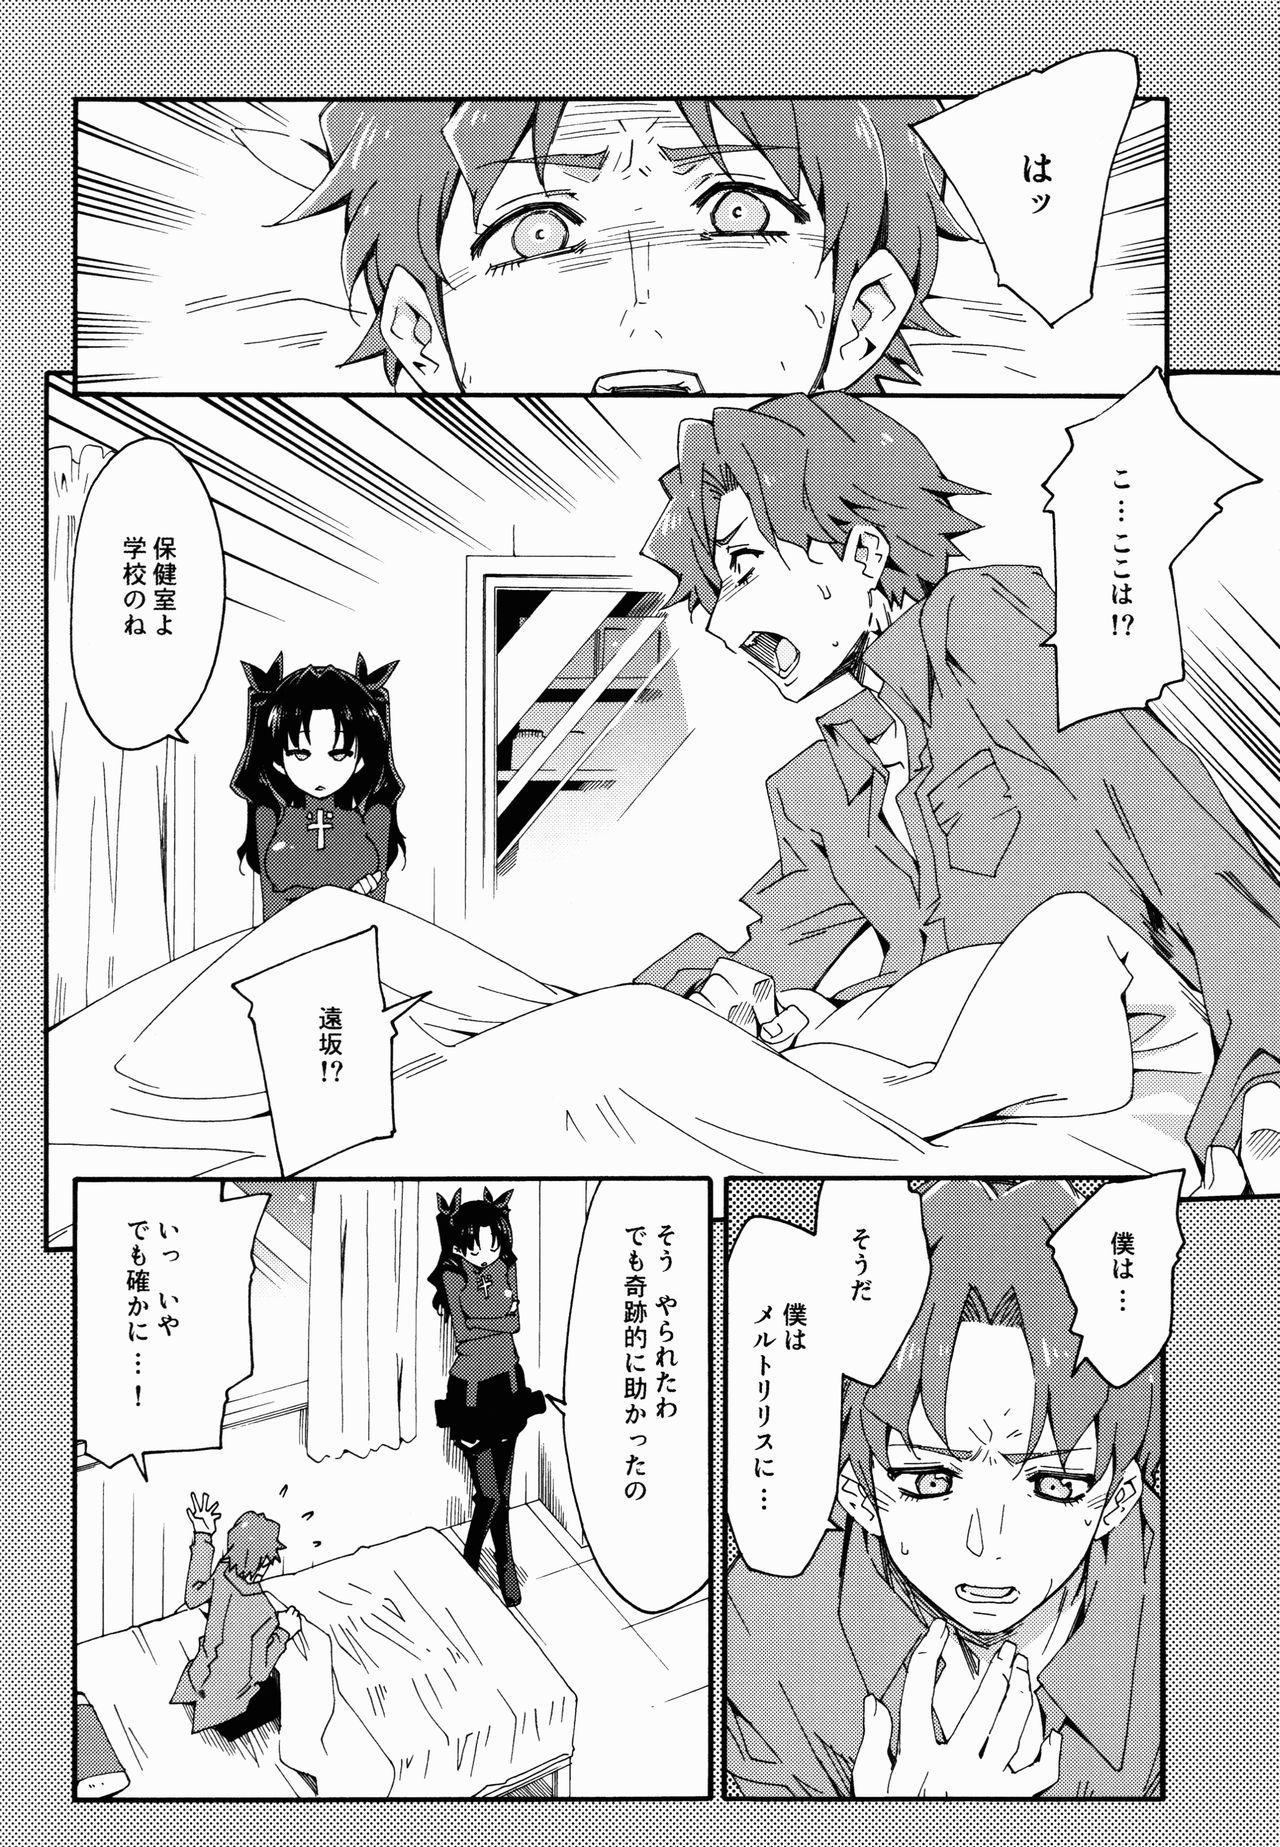 Hottie Melty/kiss - Fate extra Jacking Off - Page 6